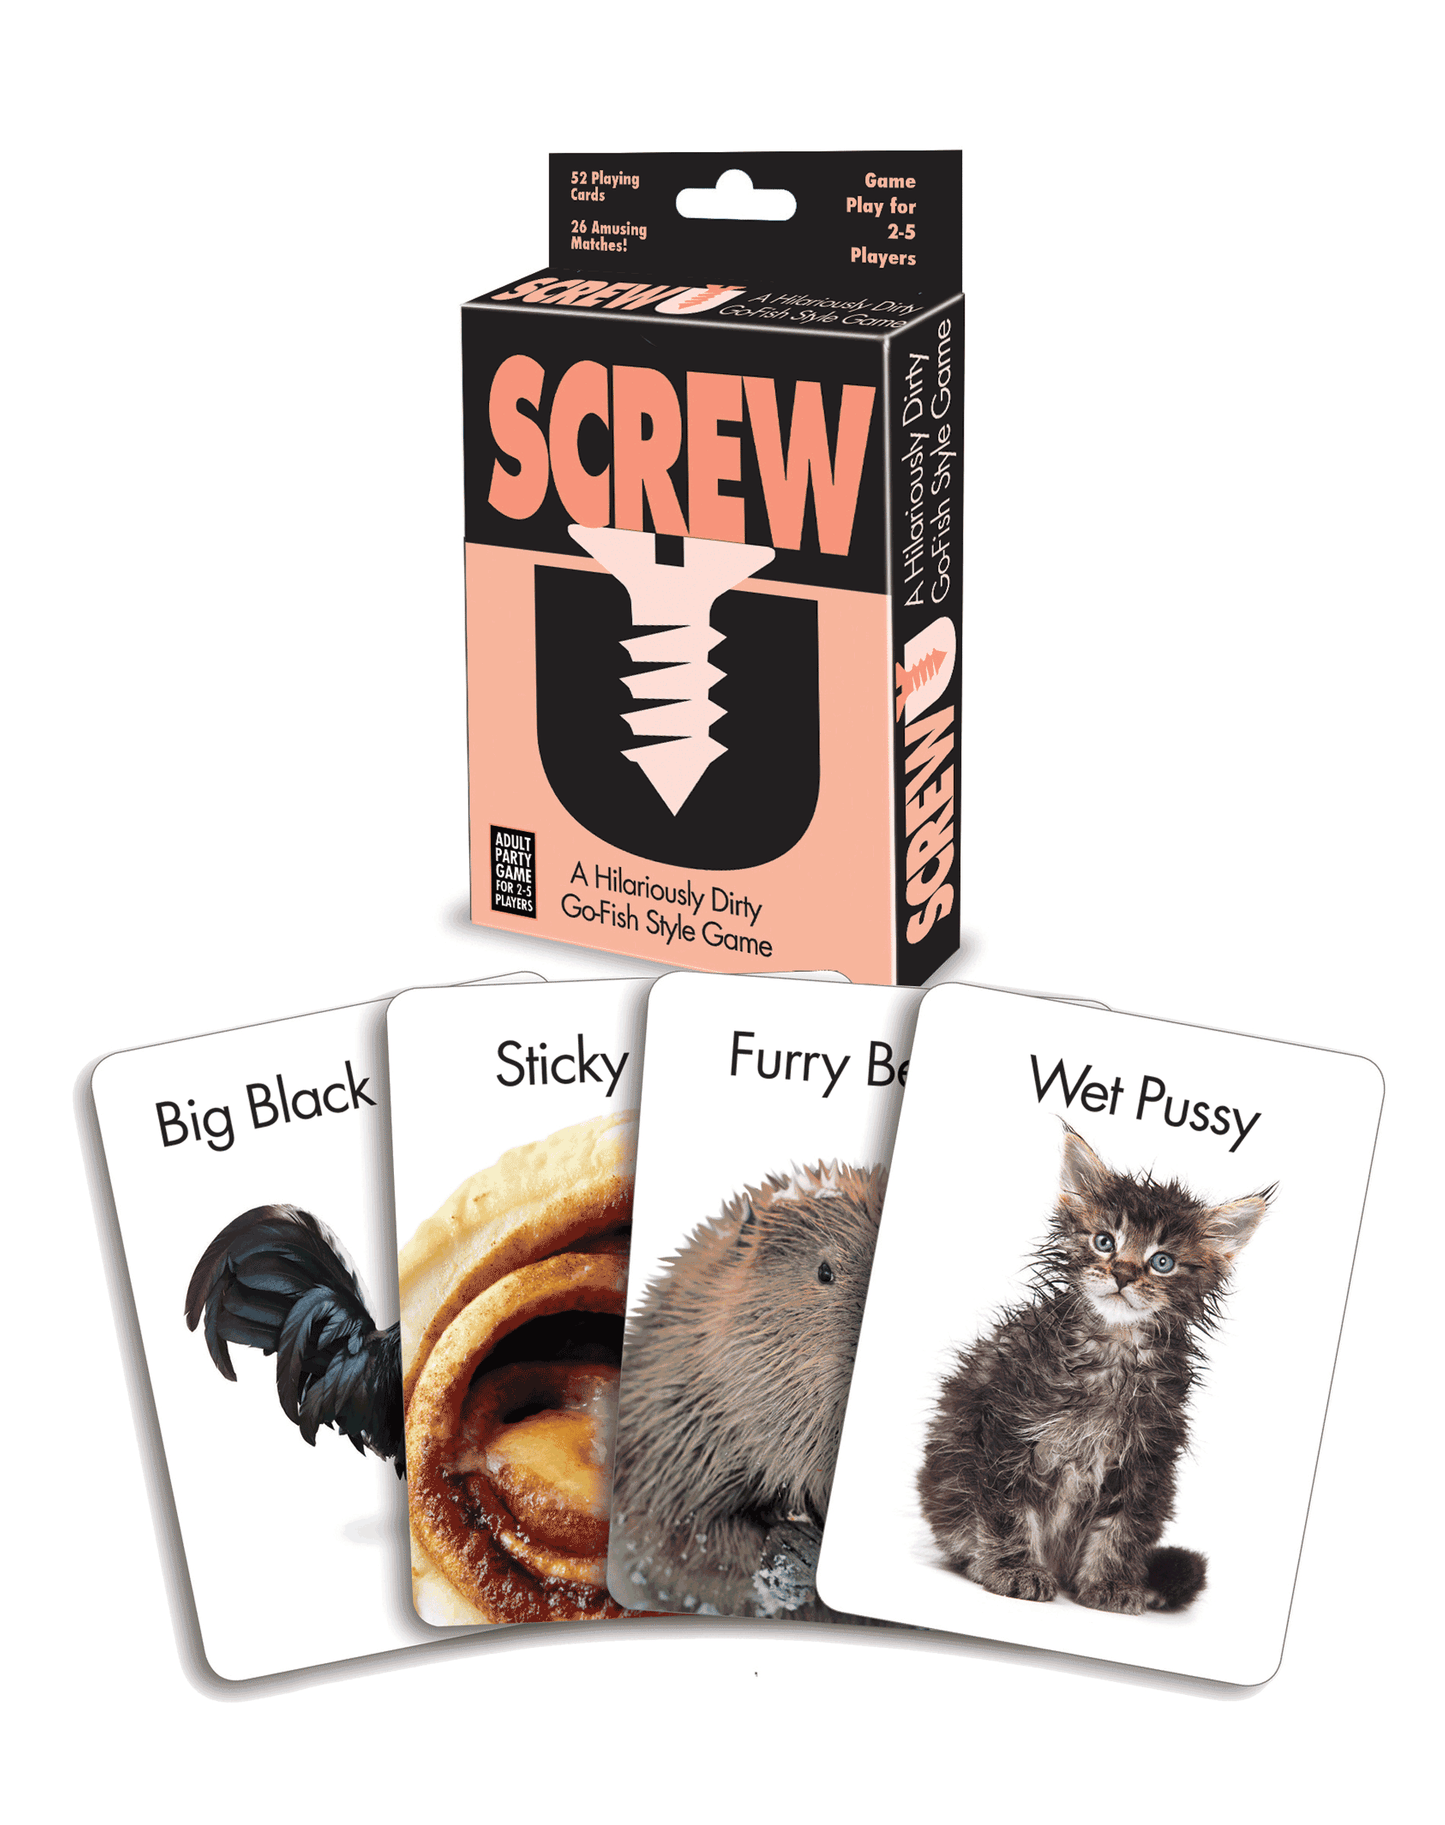 Screw U - Go Fish Style Card Game for Adults